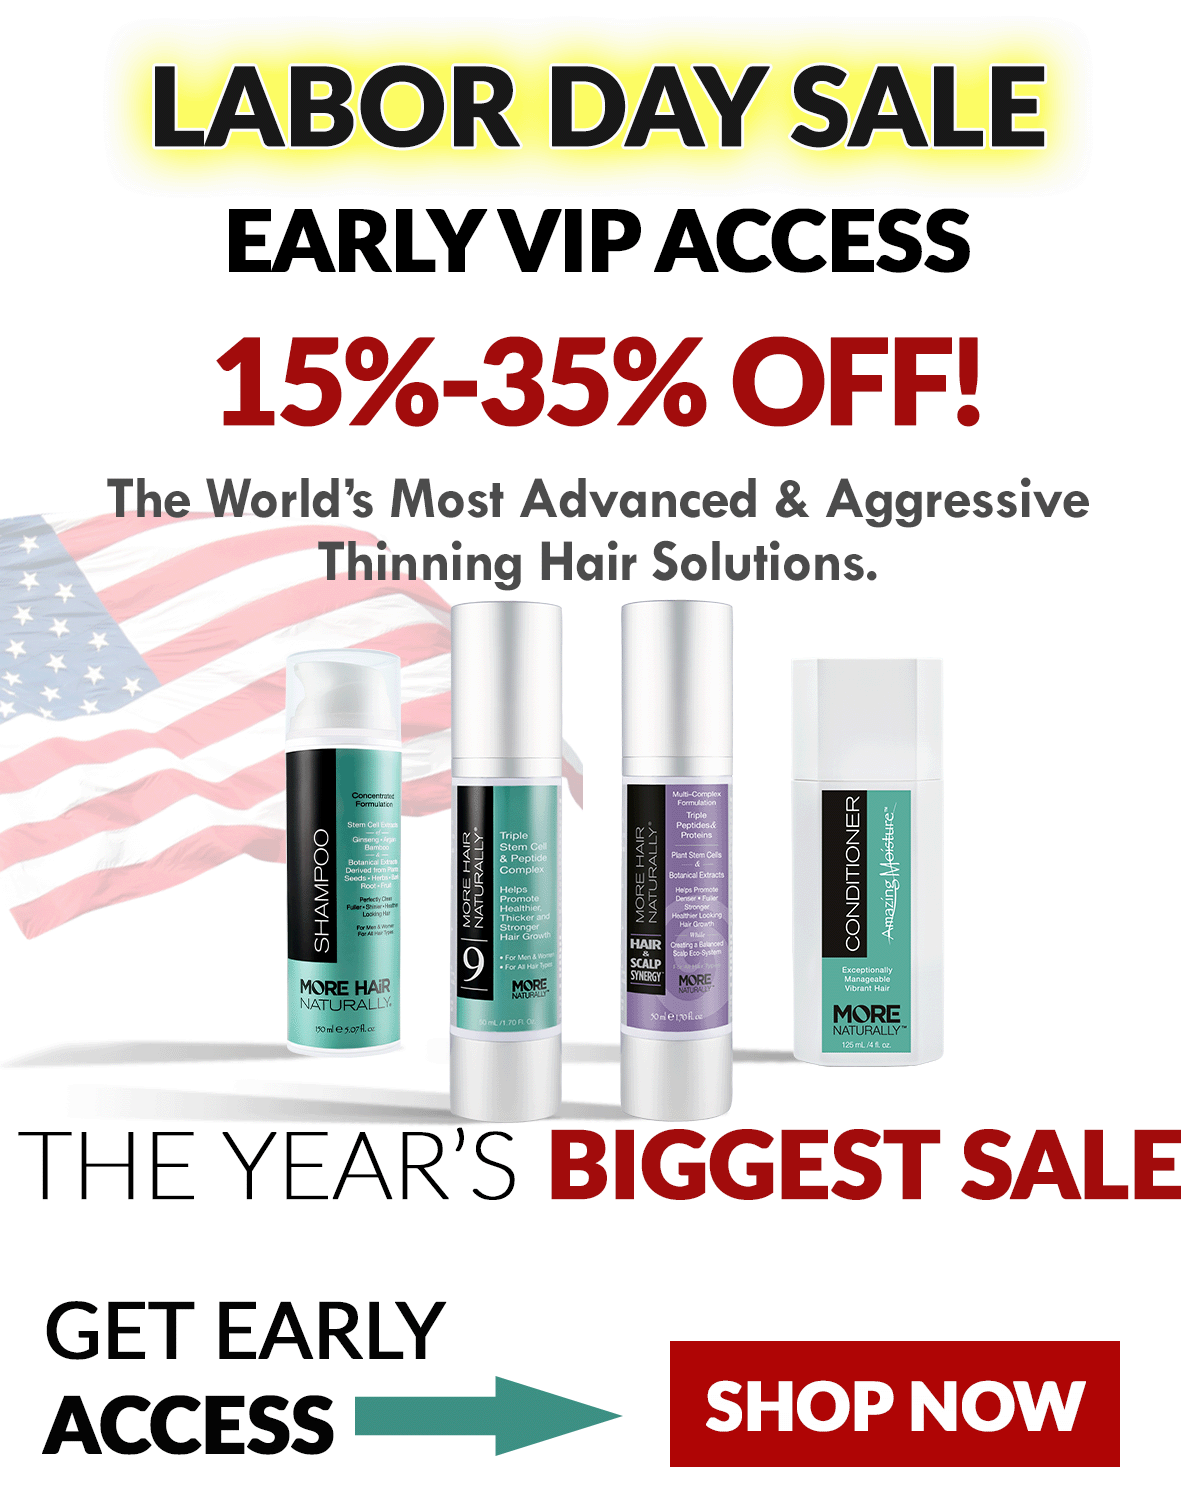 15% - 35% off your entire order!